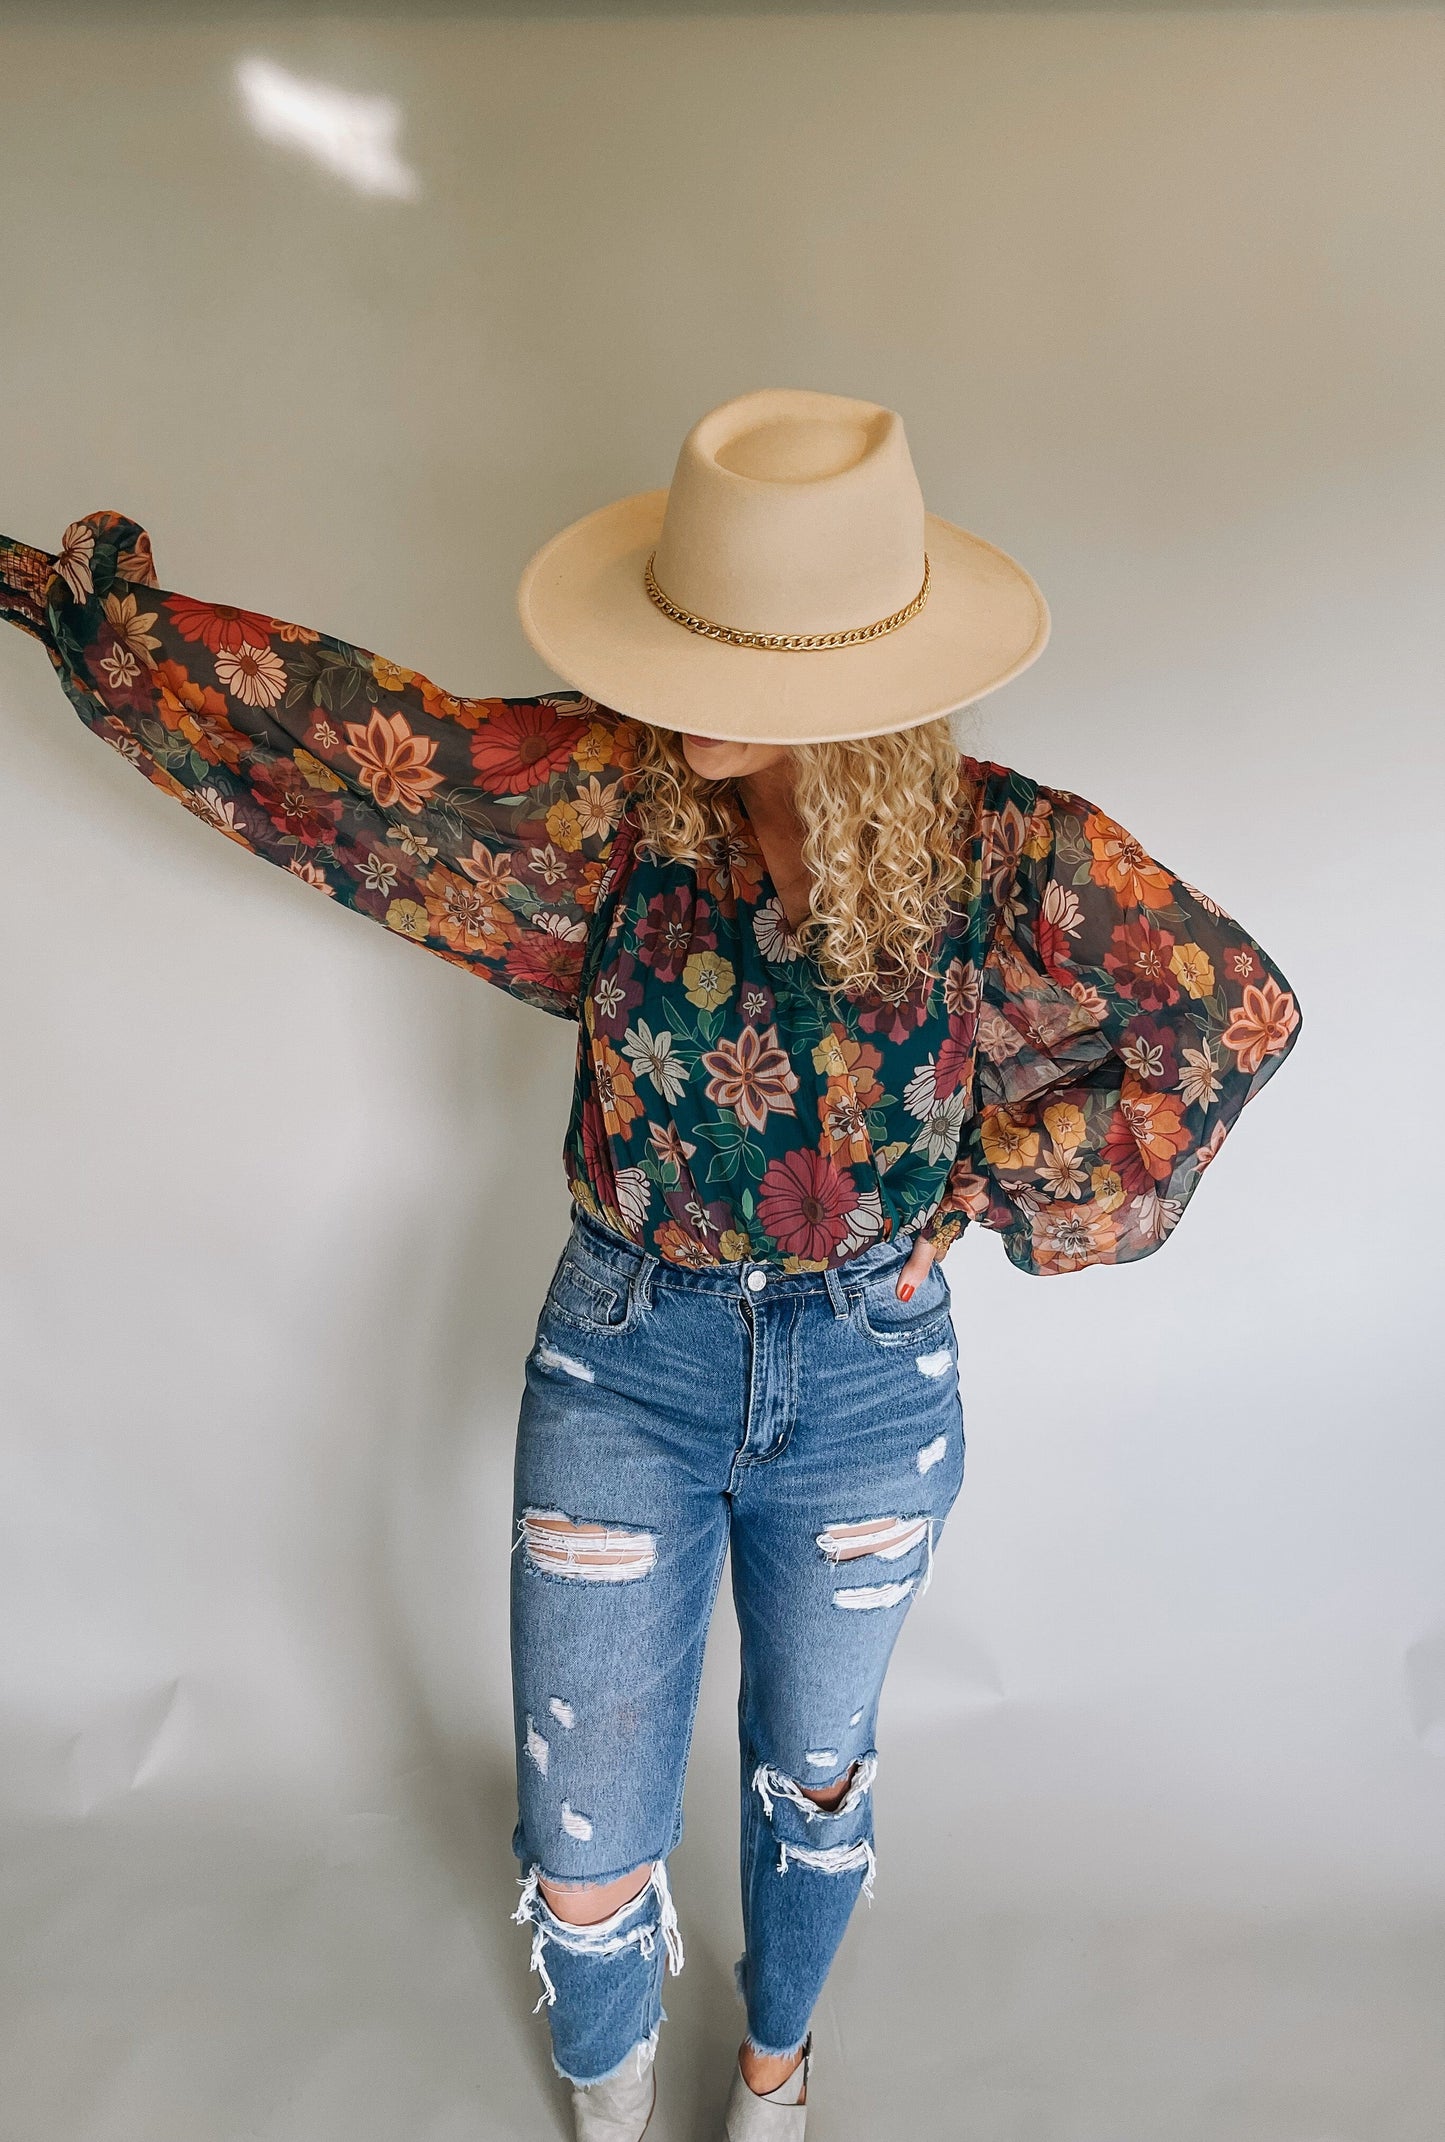 Stylish model wearing a vibrant green, orange, and red floral bodysuit with flowy sleeves, paired with blue jeans and a wide-brimmed hat with a gold chain accent